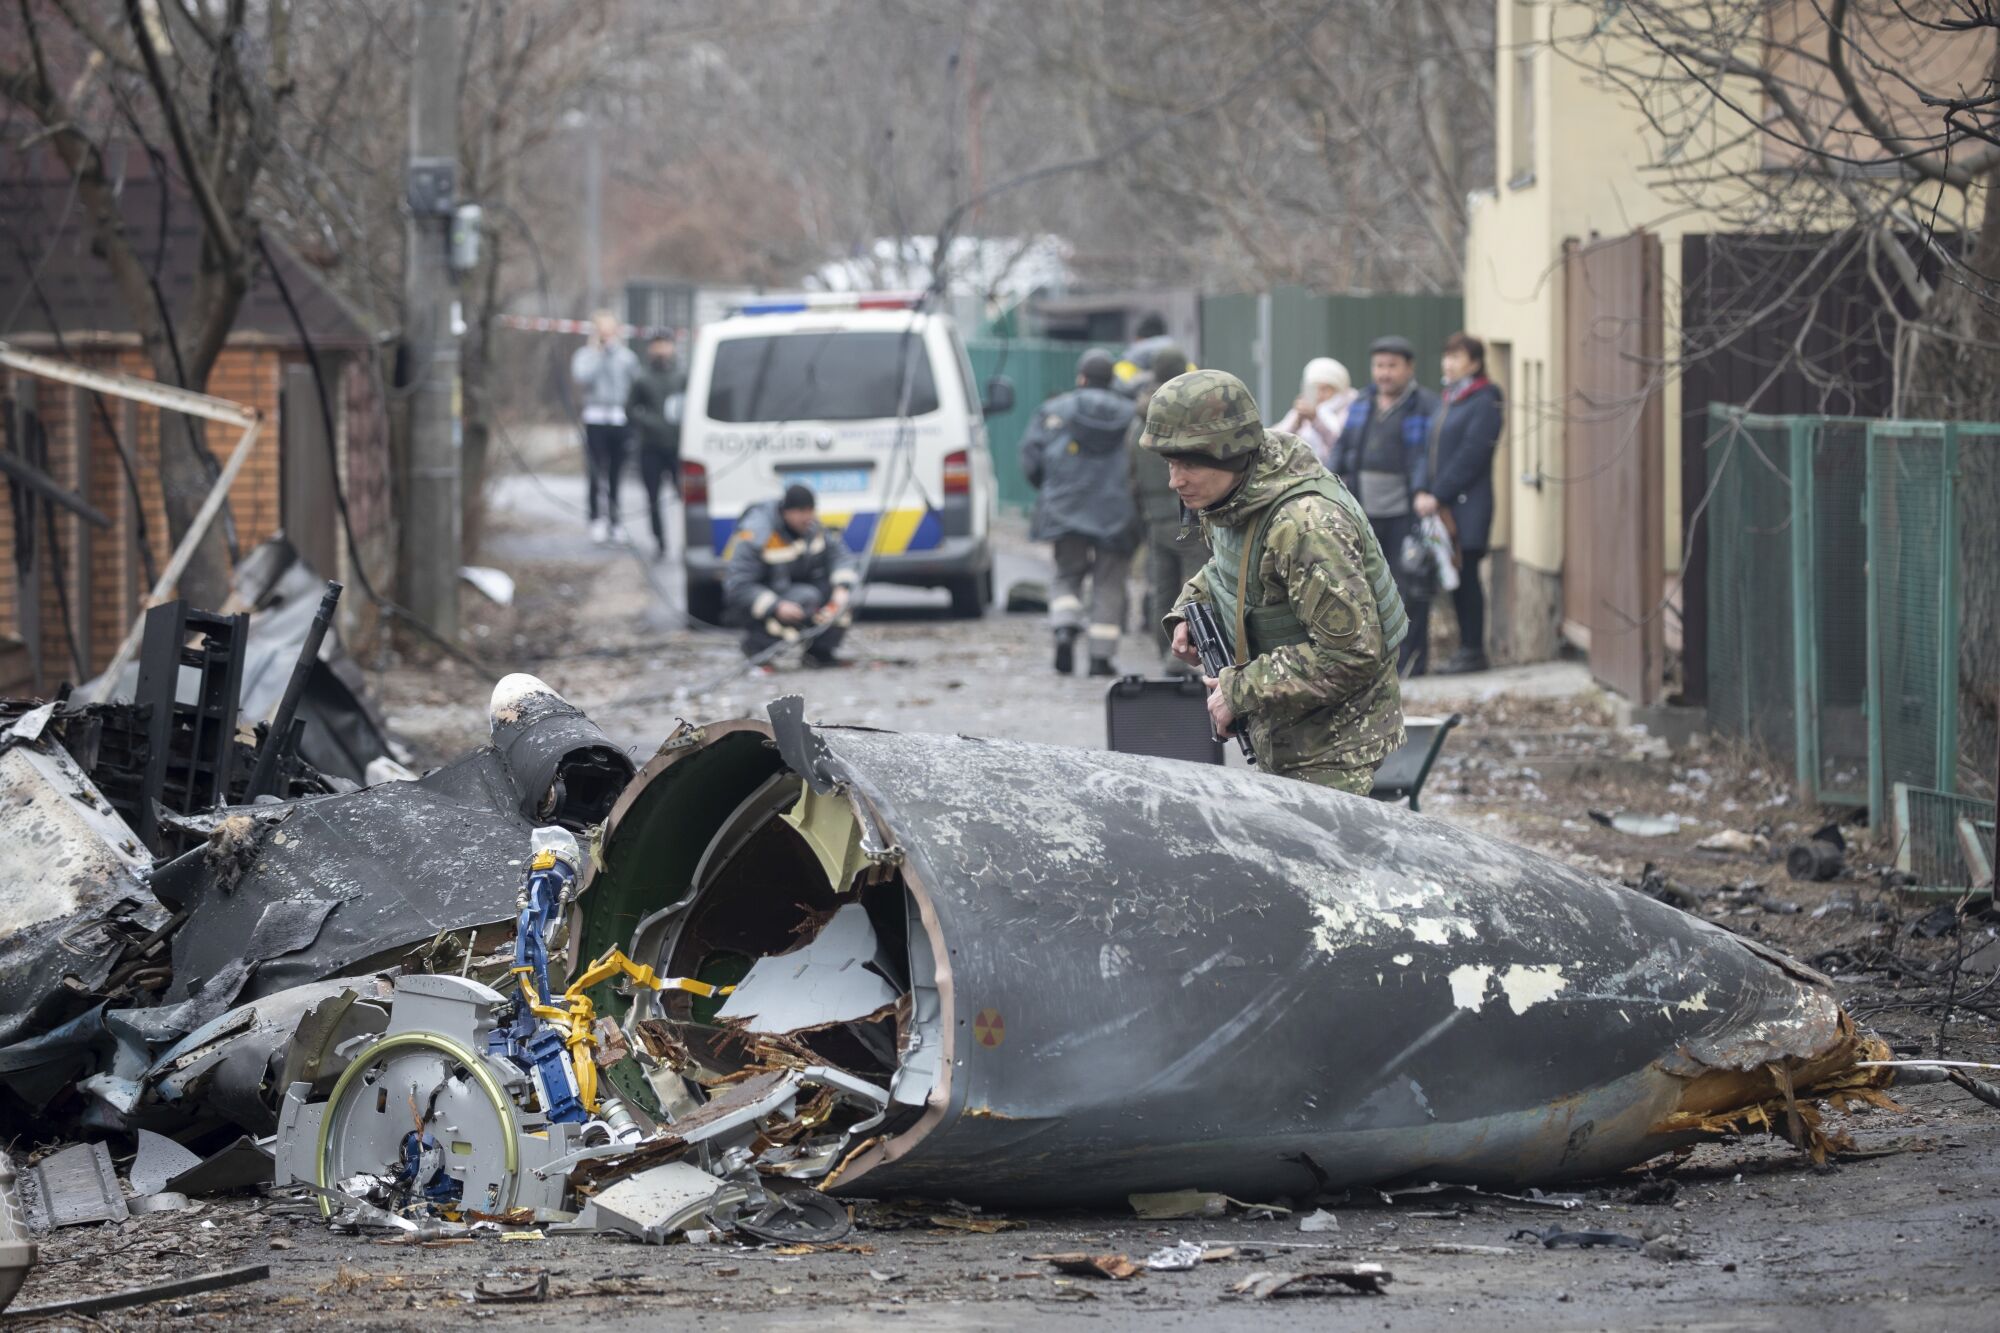 A Ukrainian soldier inspects the wreckage of a downed plane.